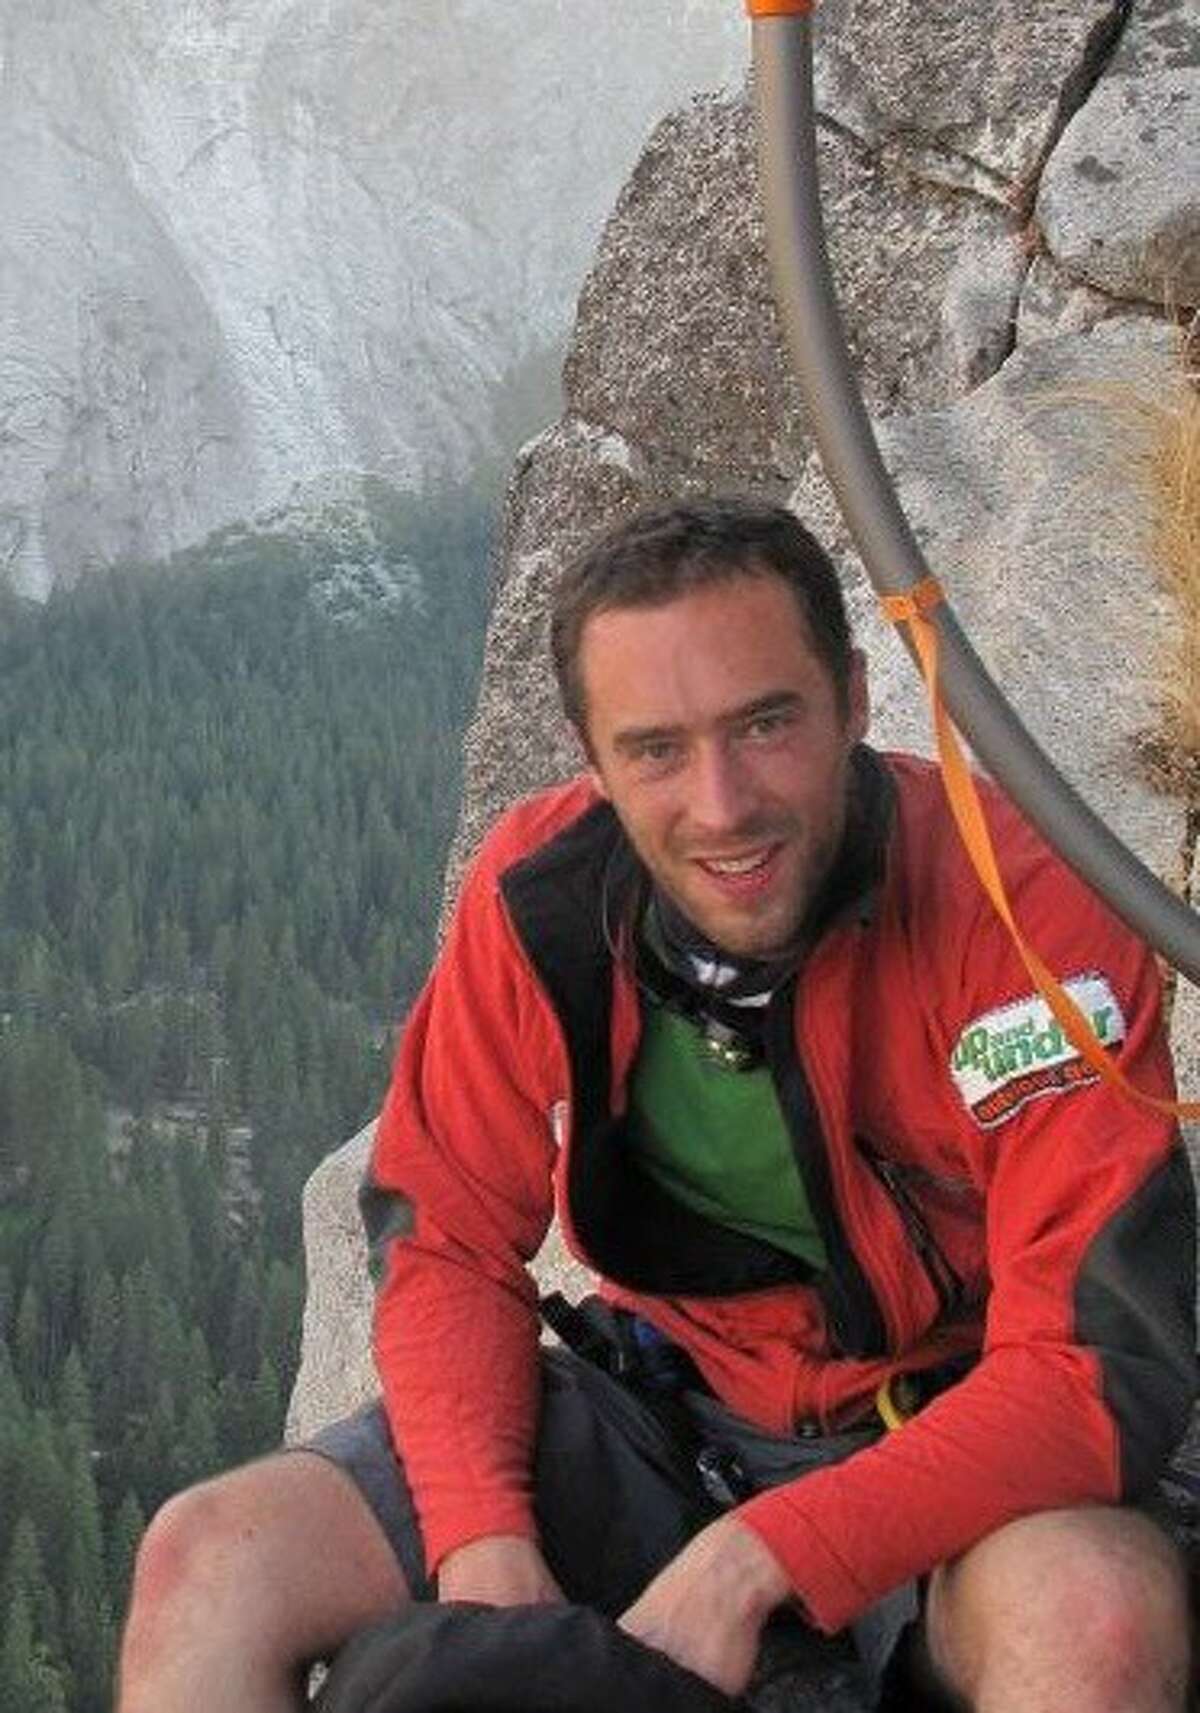 Andrew Foster, 32, died protecting his wife from rockfall in Yosemite National Park on Sept. 27, 2017.